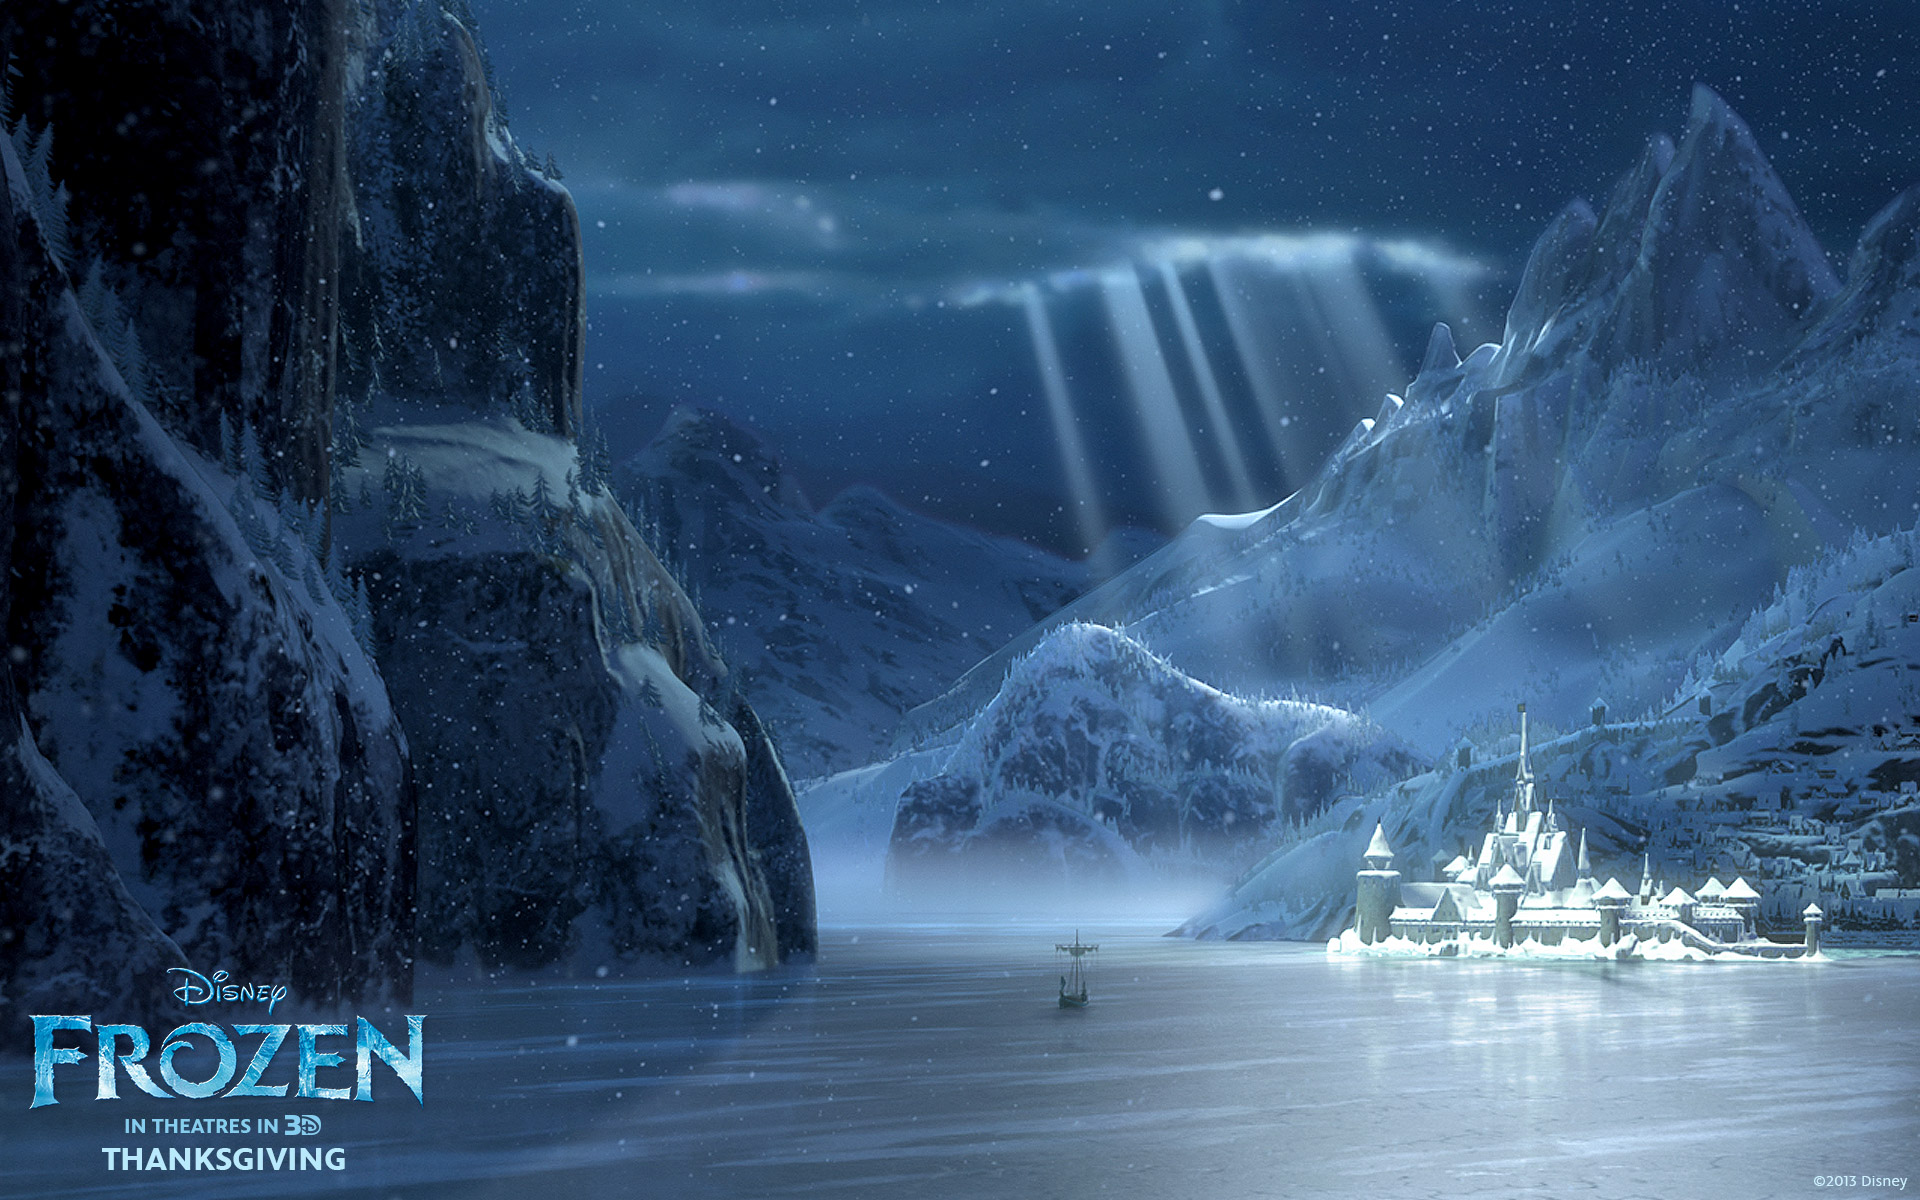  Disneys Frozen CG animated movie wallpaper image background picture 1920x1200